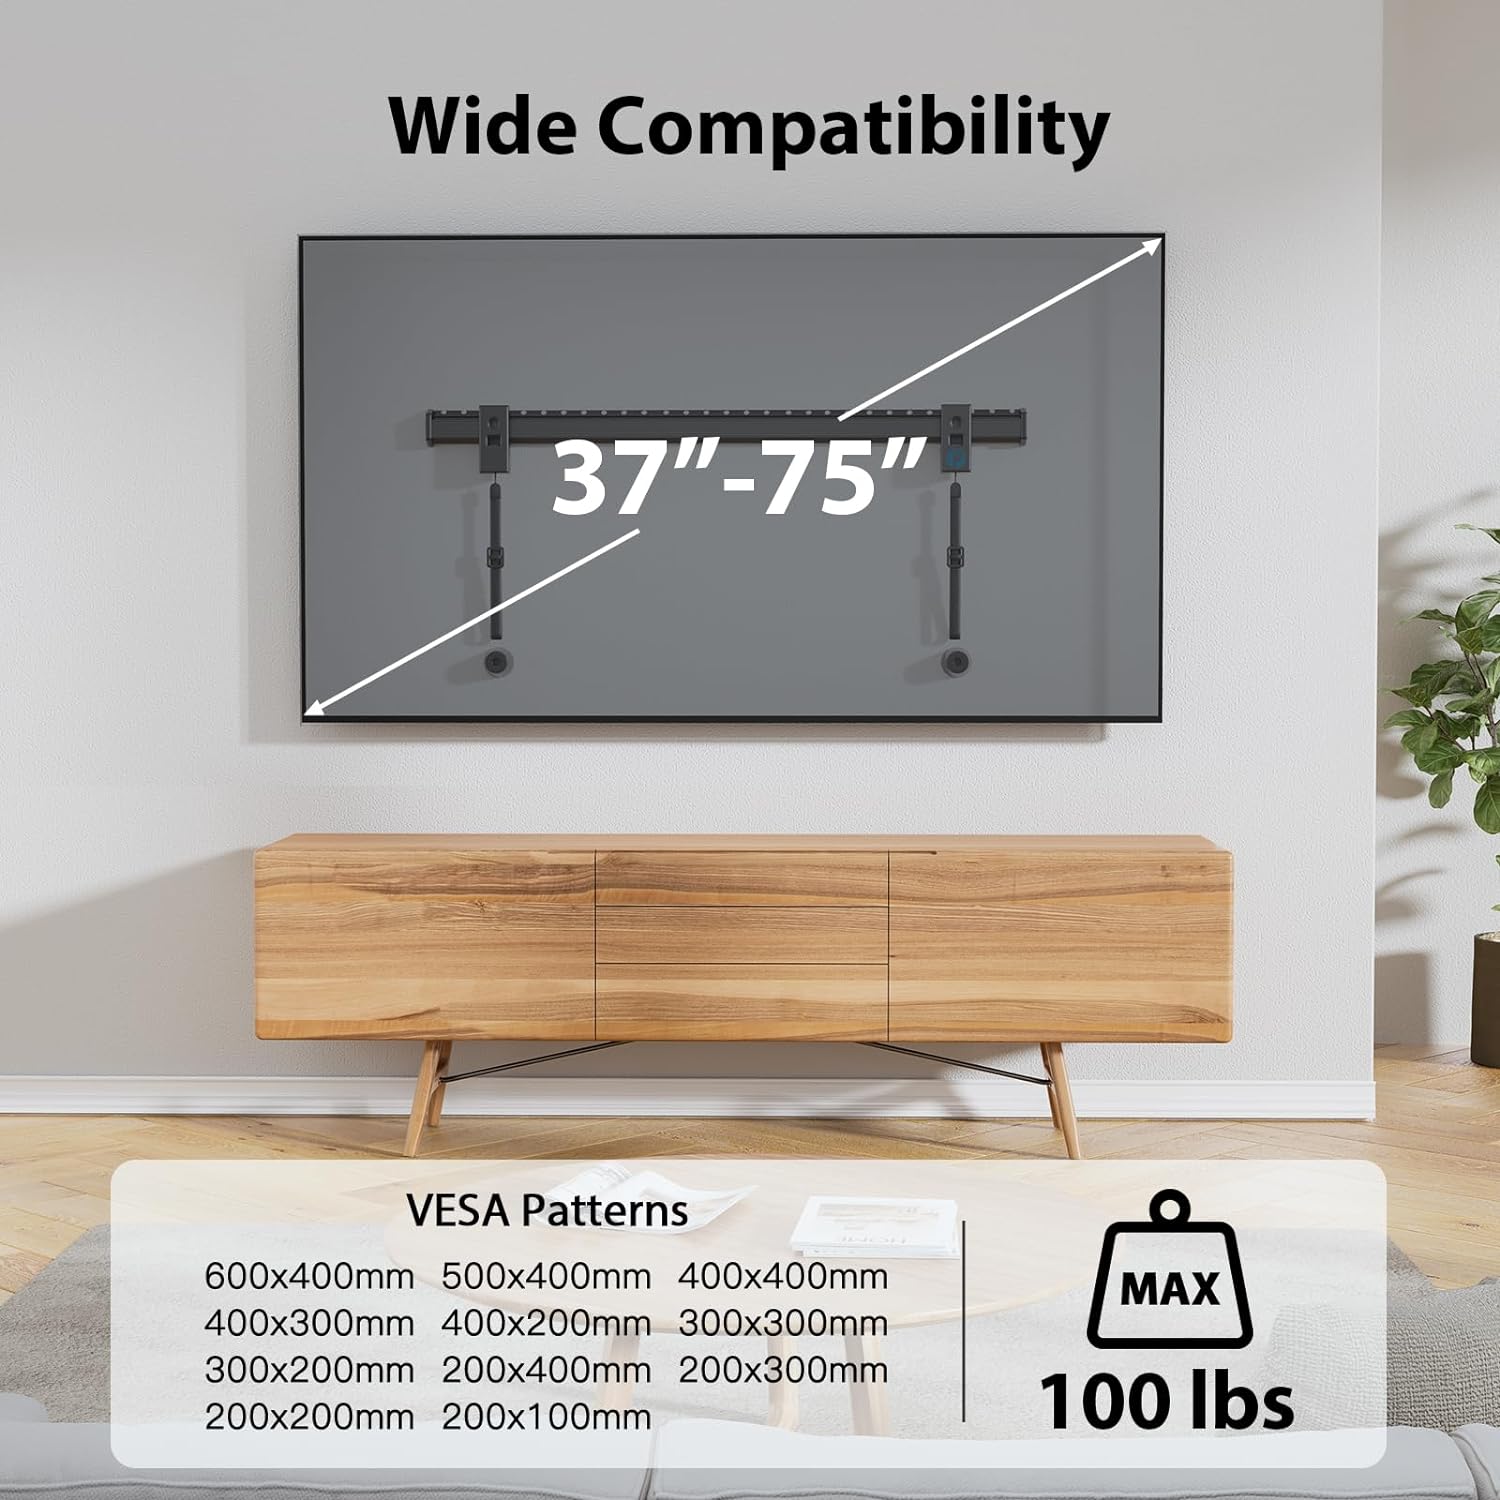 Studless Tv Wall Mount For 37